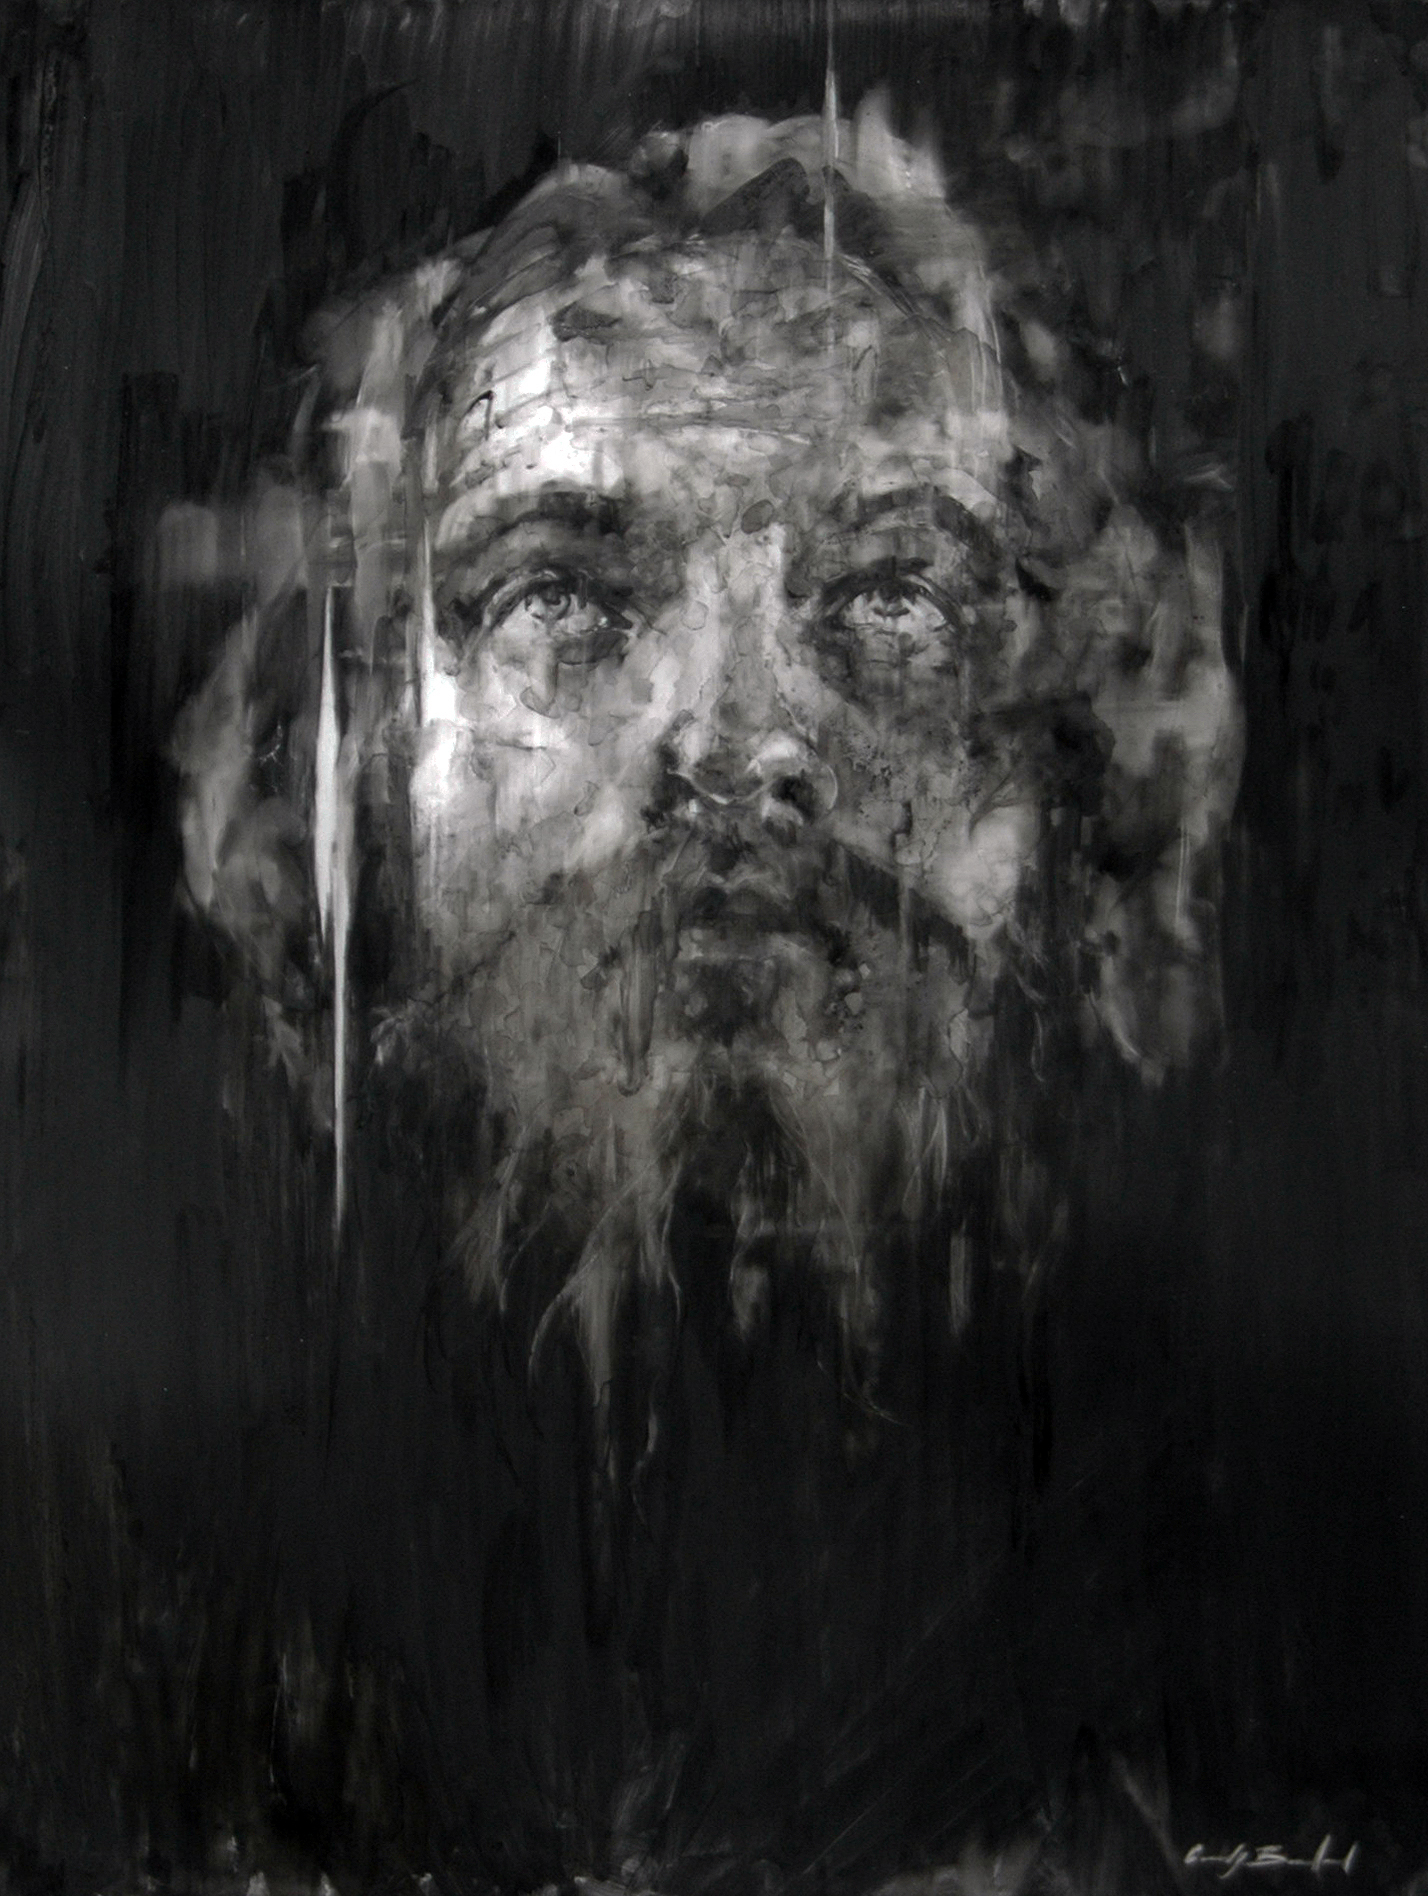  "Stephen", 2012, charcoal on mylar, 24x18 in. 